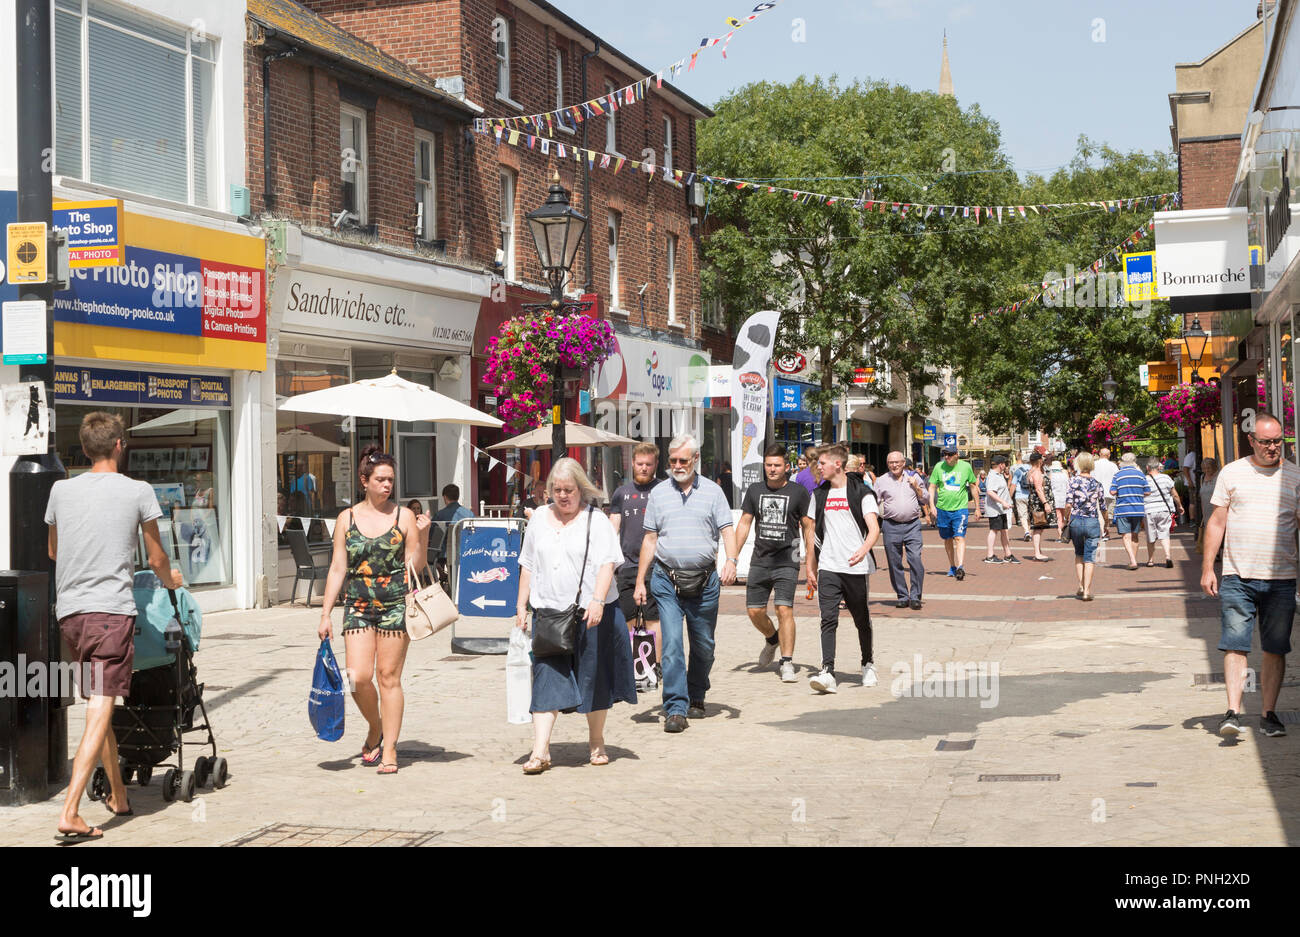 People shopping in pedestrianised High Street area, Poole, Dorset, England, UK Stock Photo